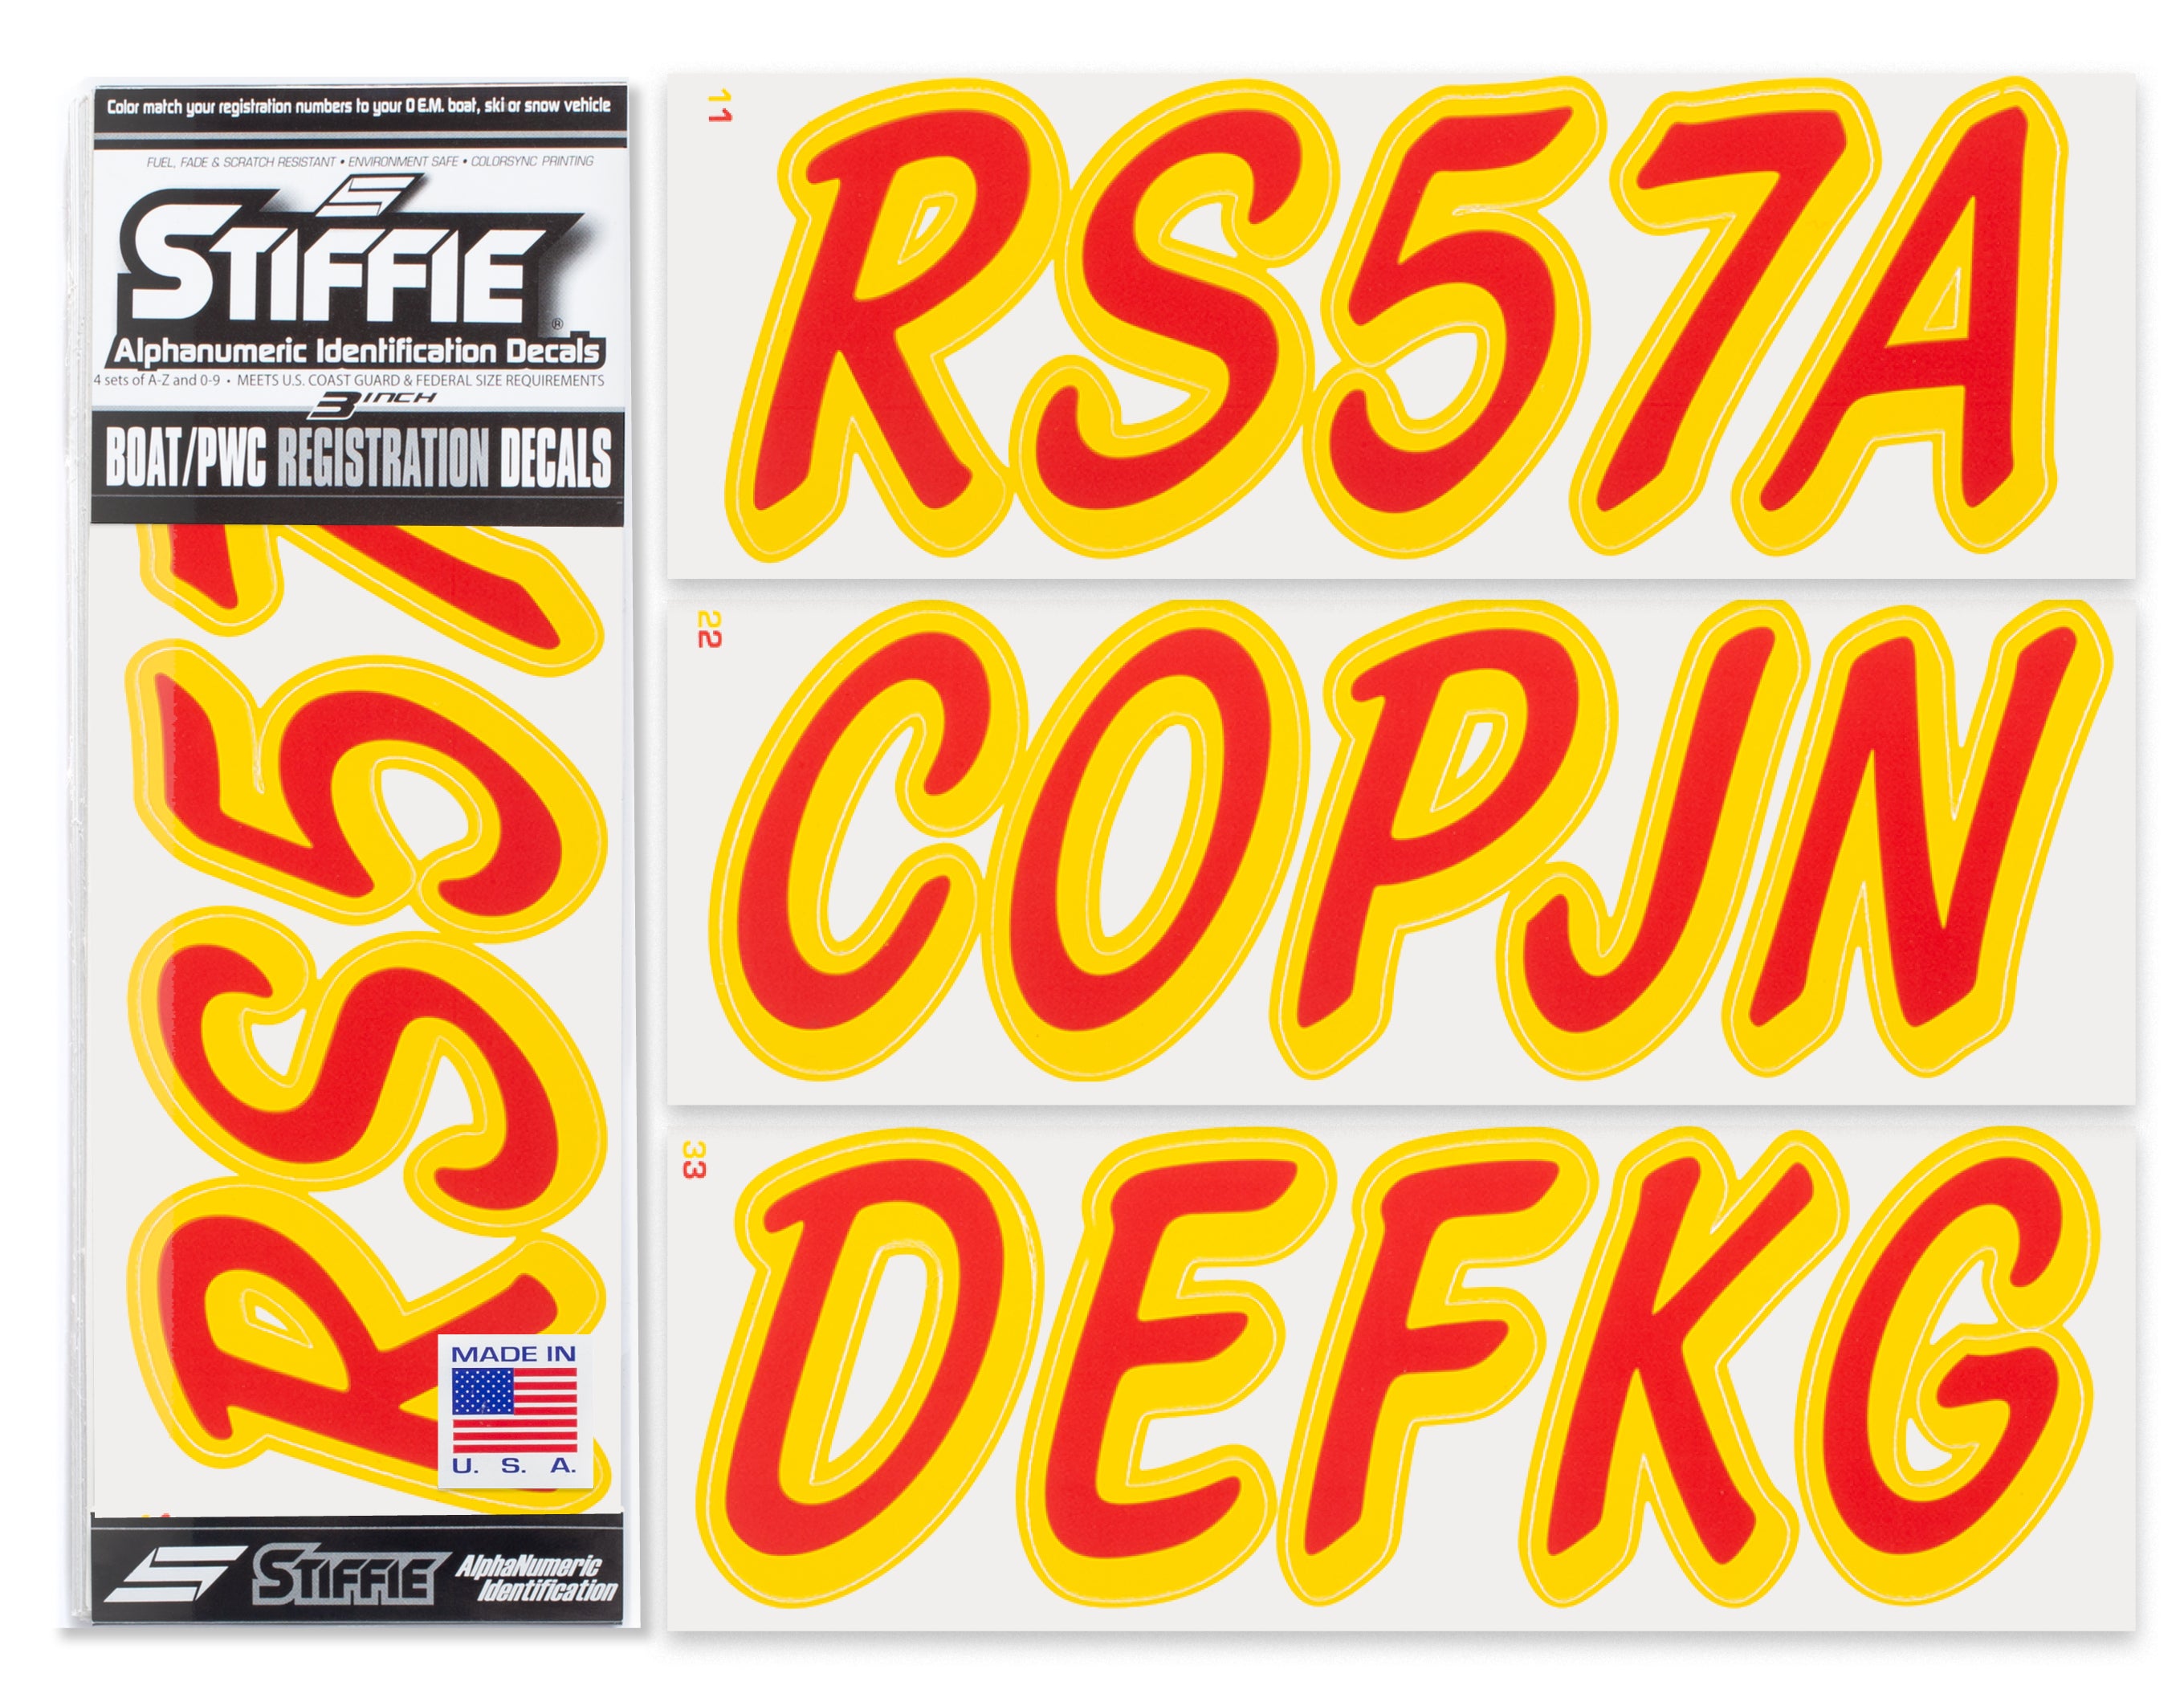 STIFFIE Whipline Solid Red/Yellow 3" Alpha-Numeric Registration Identification Numbers Stickers Decals for Boats & Personal Watercraft